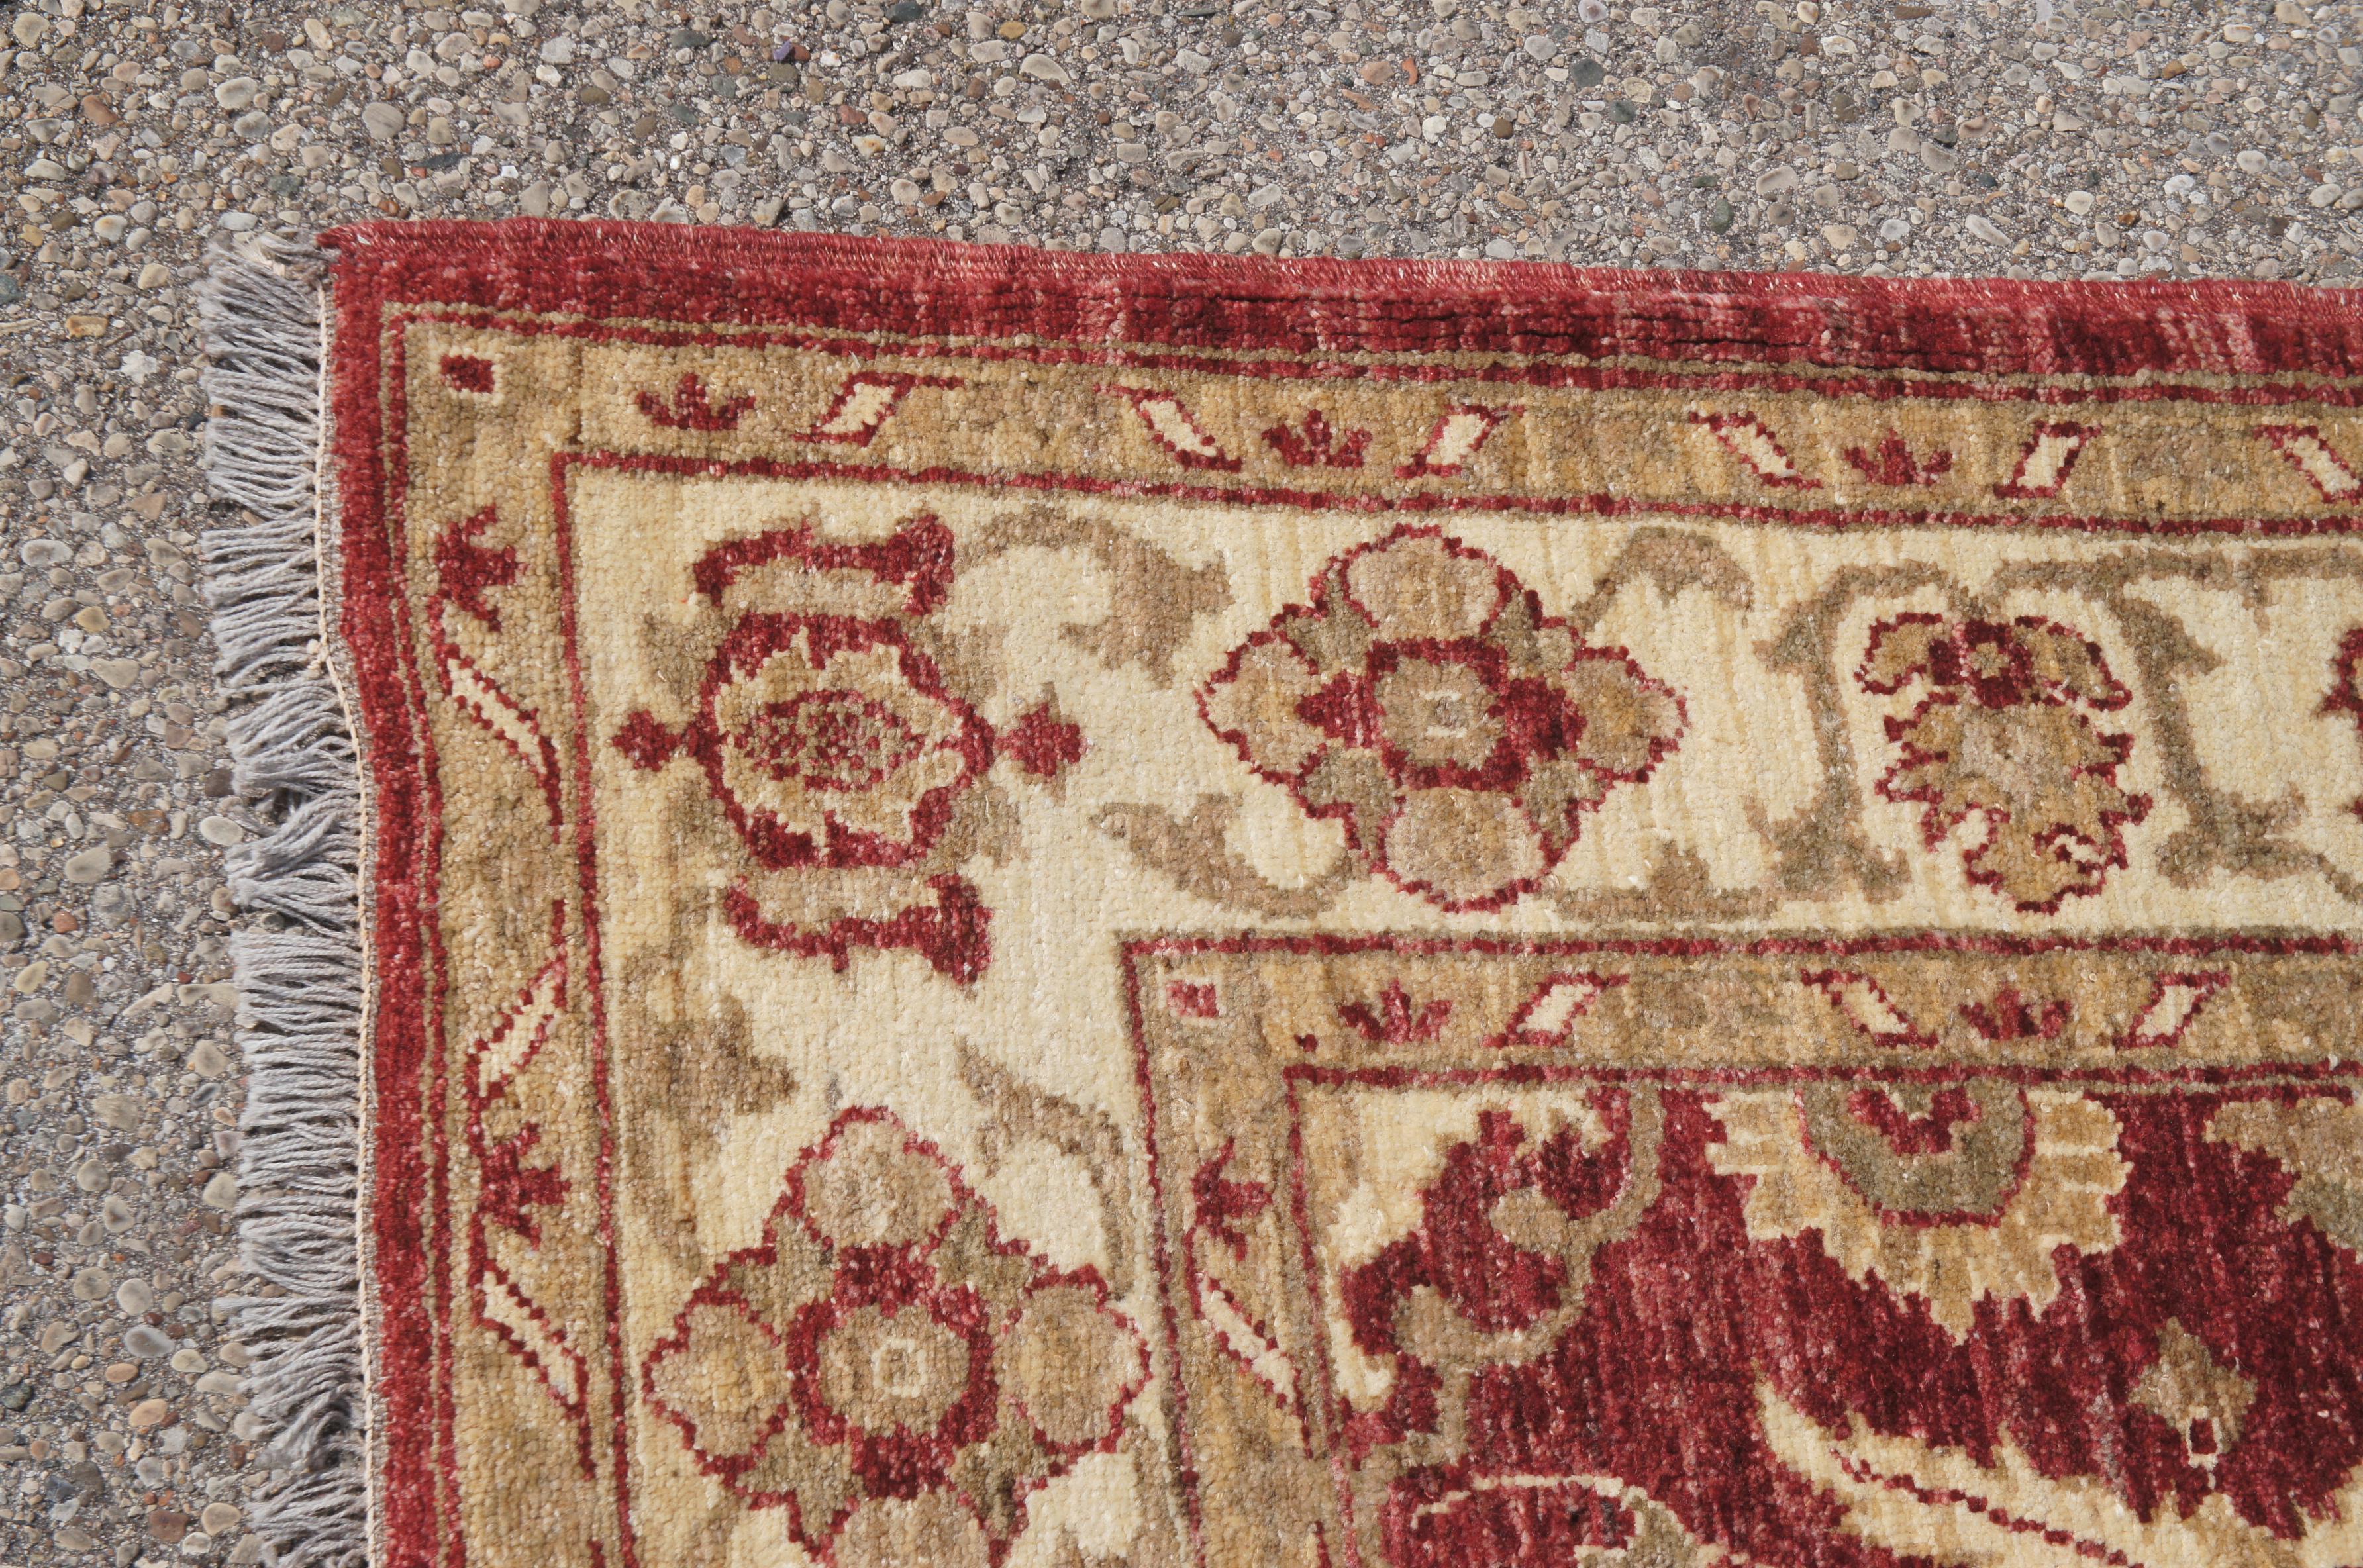 20th Century Hand Woven Turkish Red & Beige Geometric Floral Wool Carpet Area Rug 5' x 7' For Sale